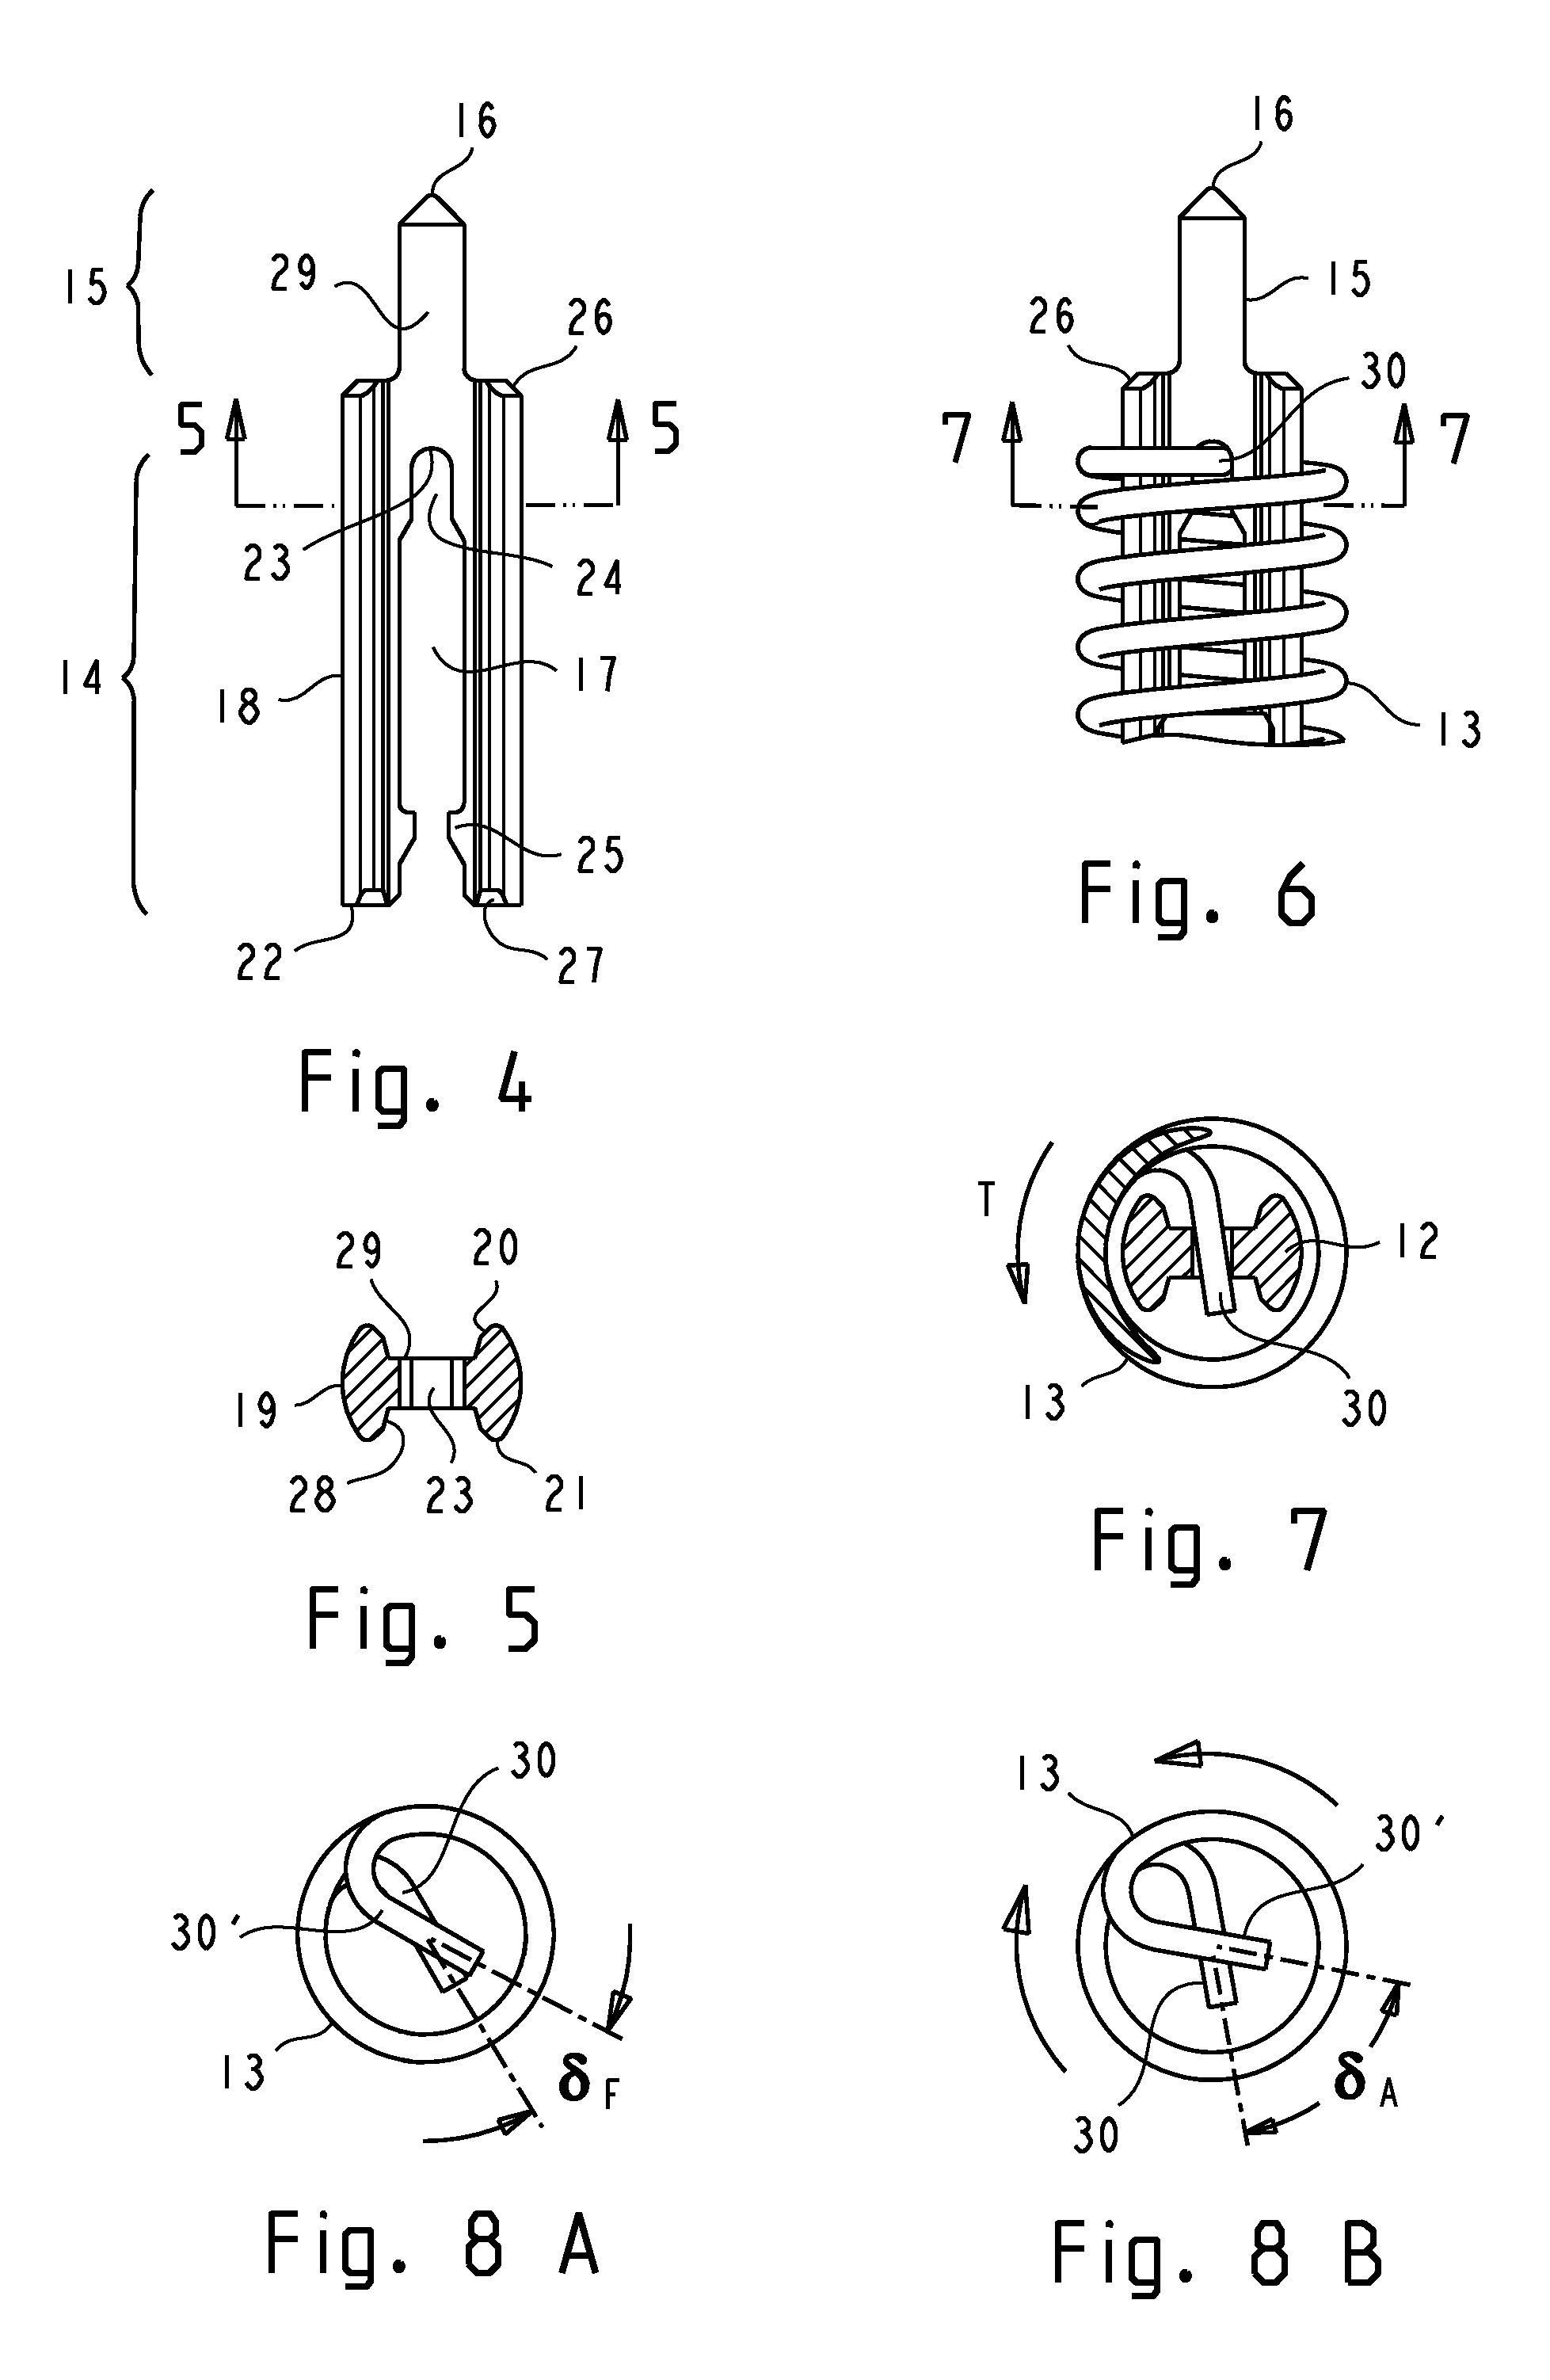 Contact probe with conductively coupled plungers